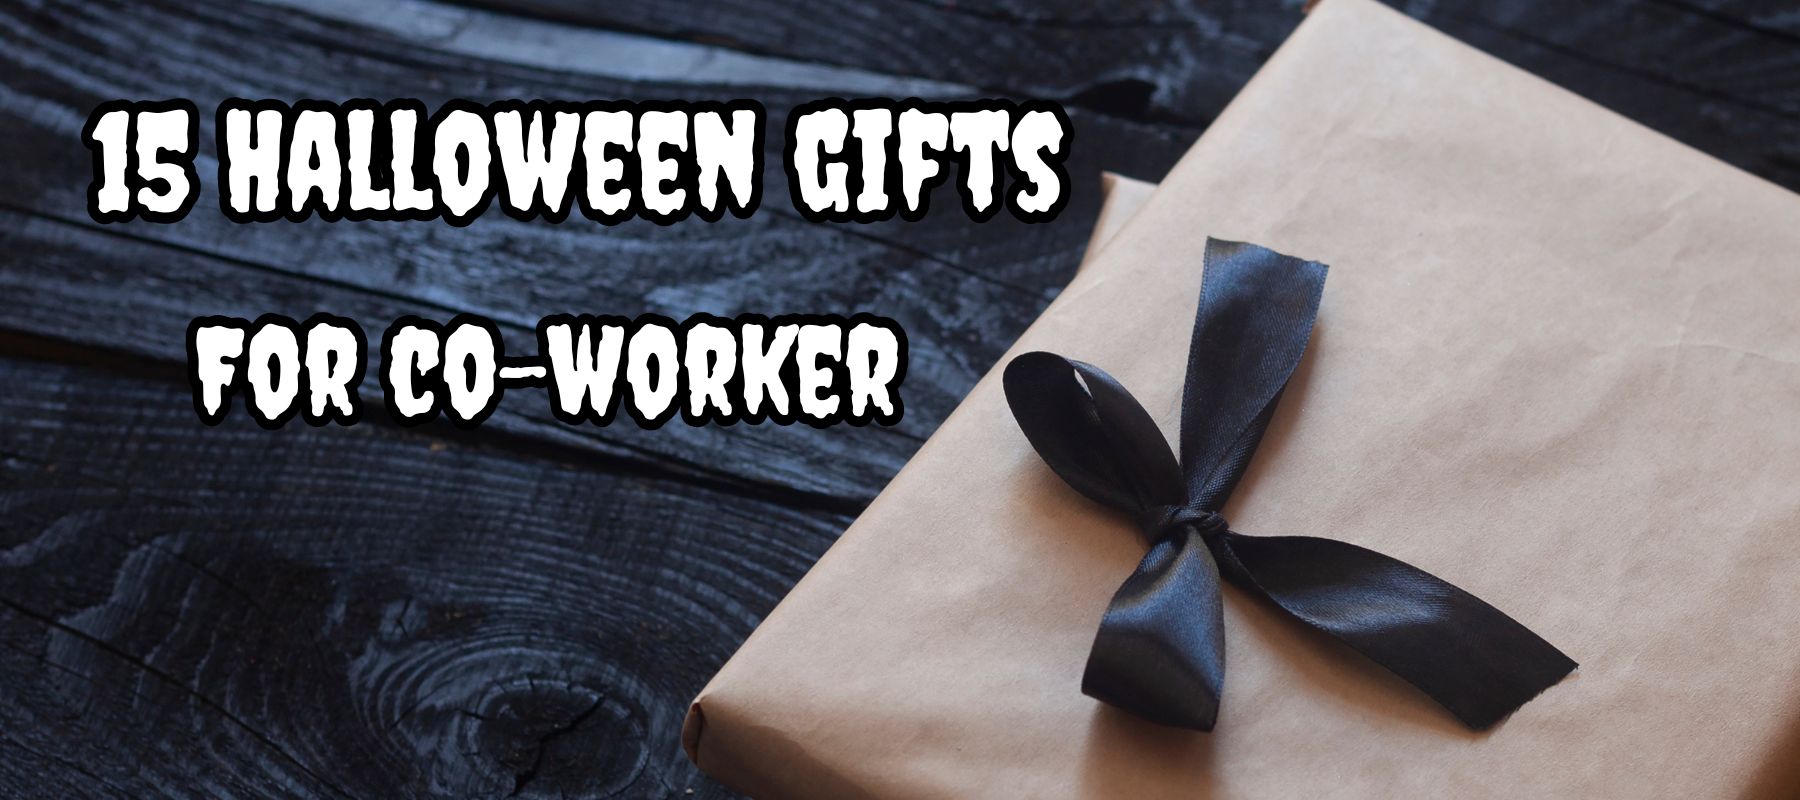 Halloween-gifts-for-co-workers